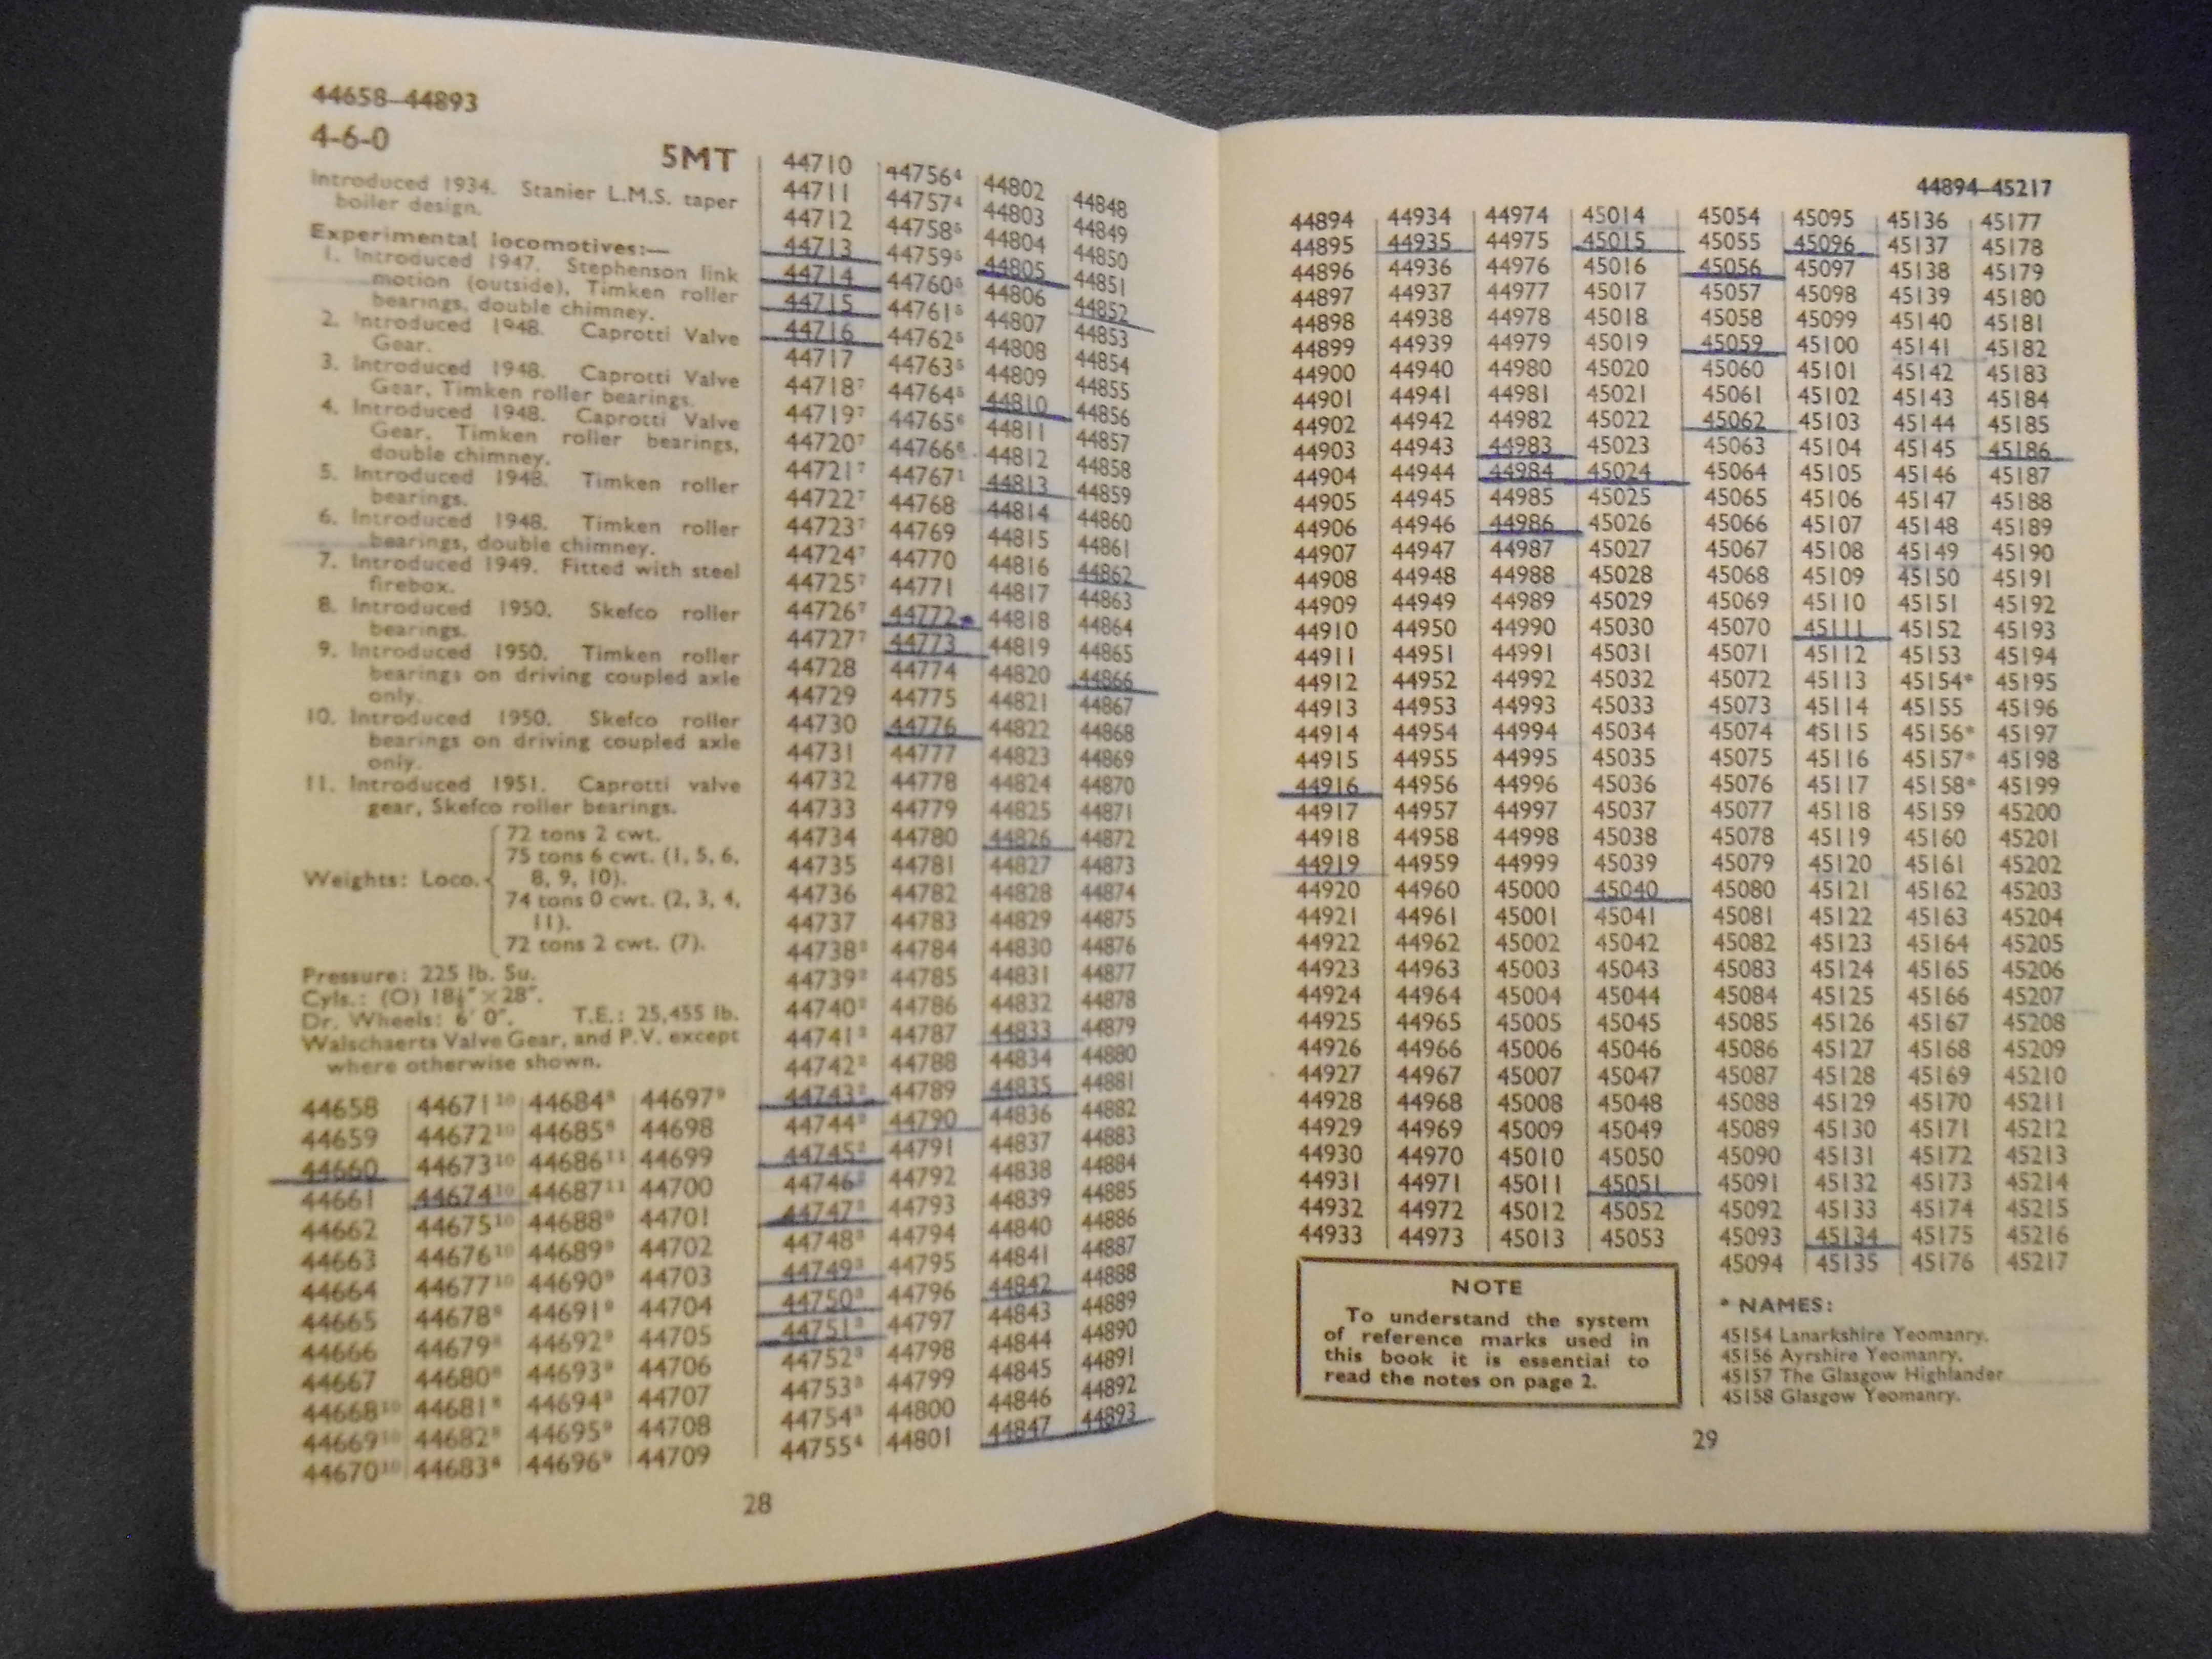 Trainspotter's jottings of "cops" or sightings of locos and recorded in Ian Allan's ABC guide